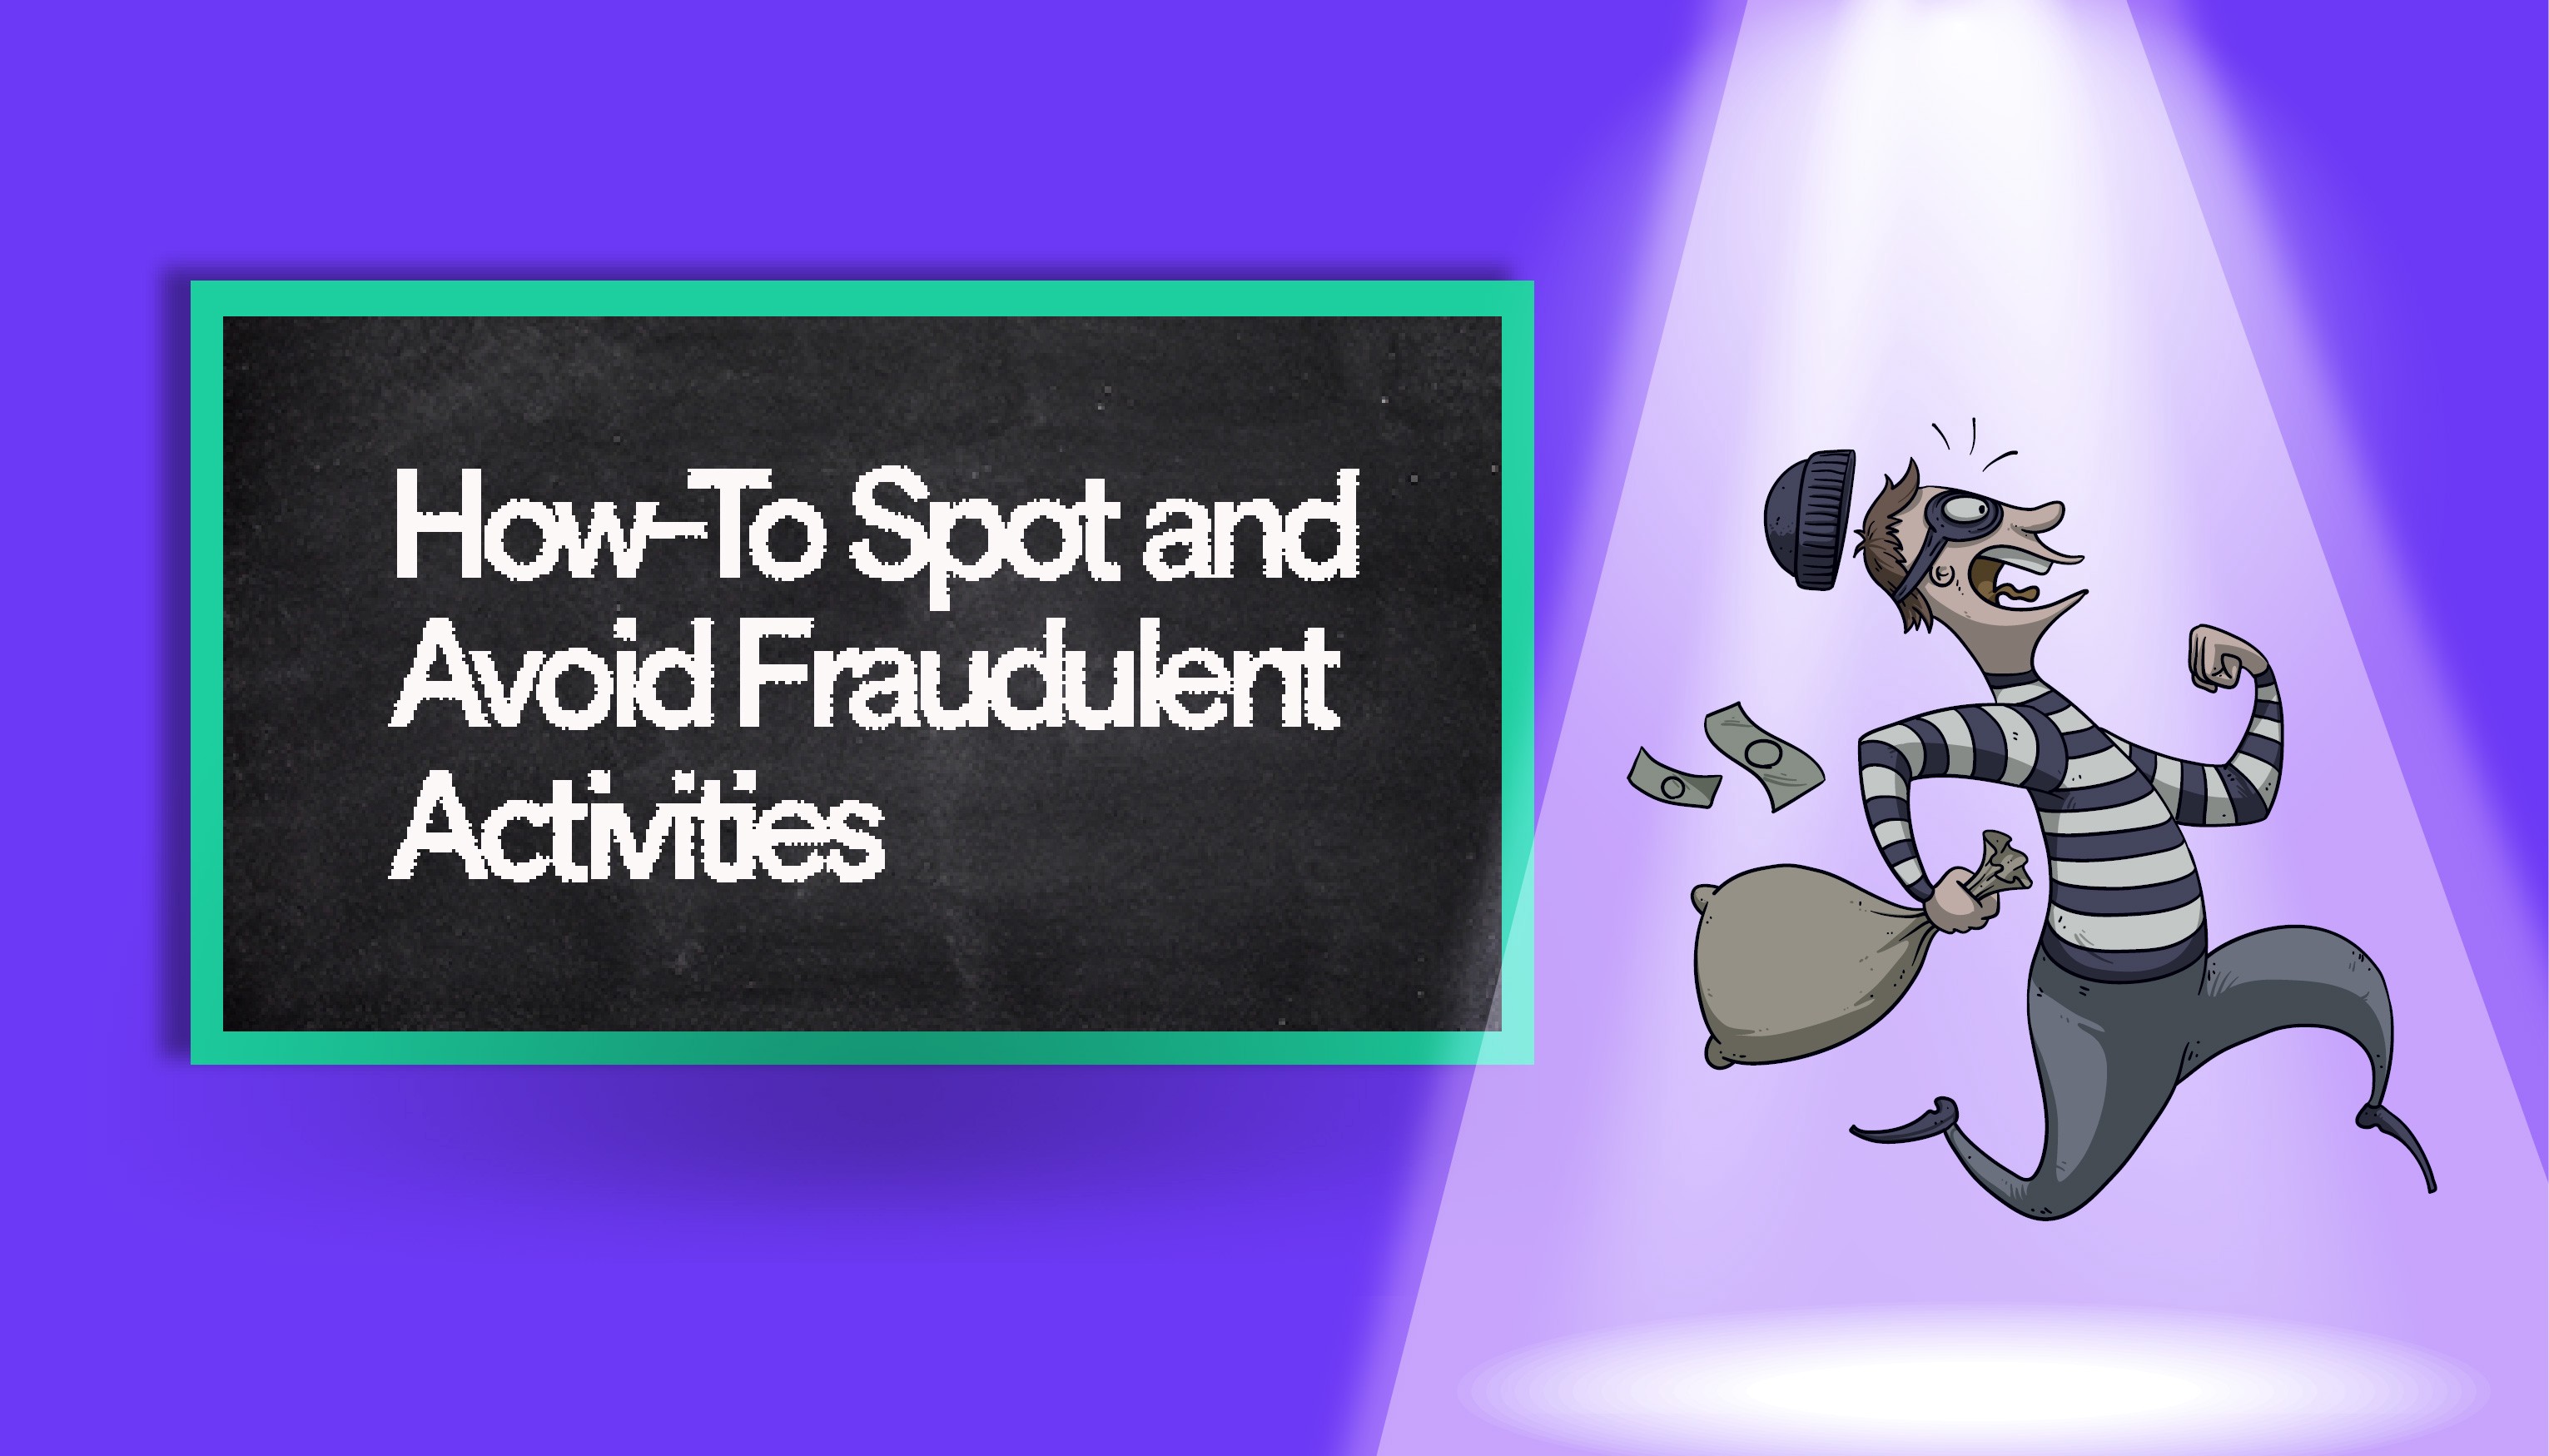 How to spot fraudulent activity when you trade?